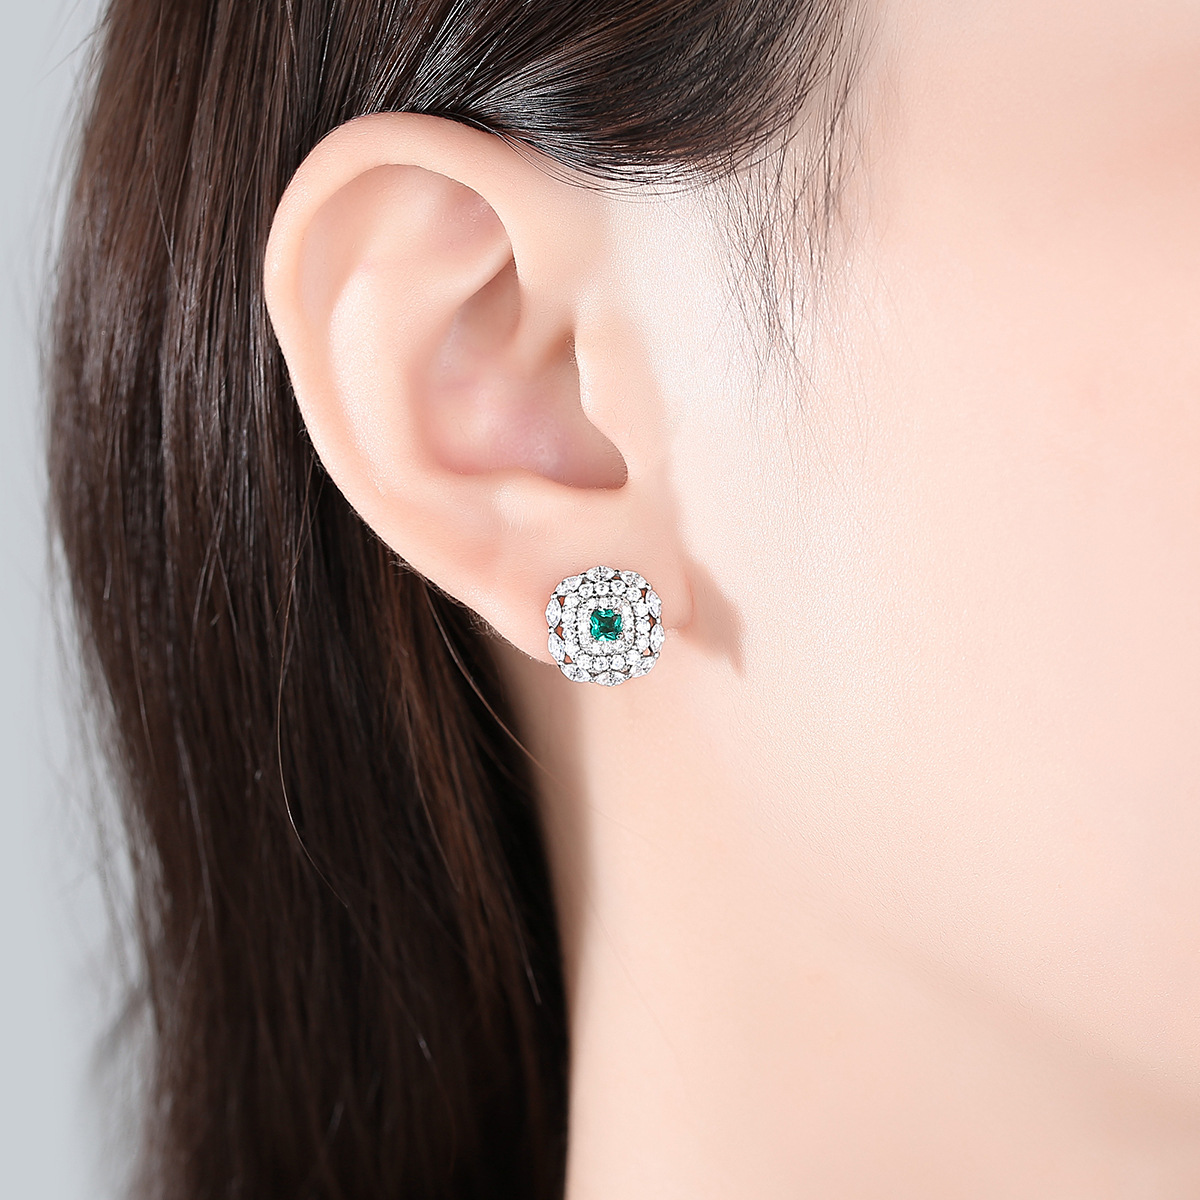 3A Cubic Cz Square Design Sterling Silver Earring